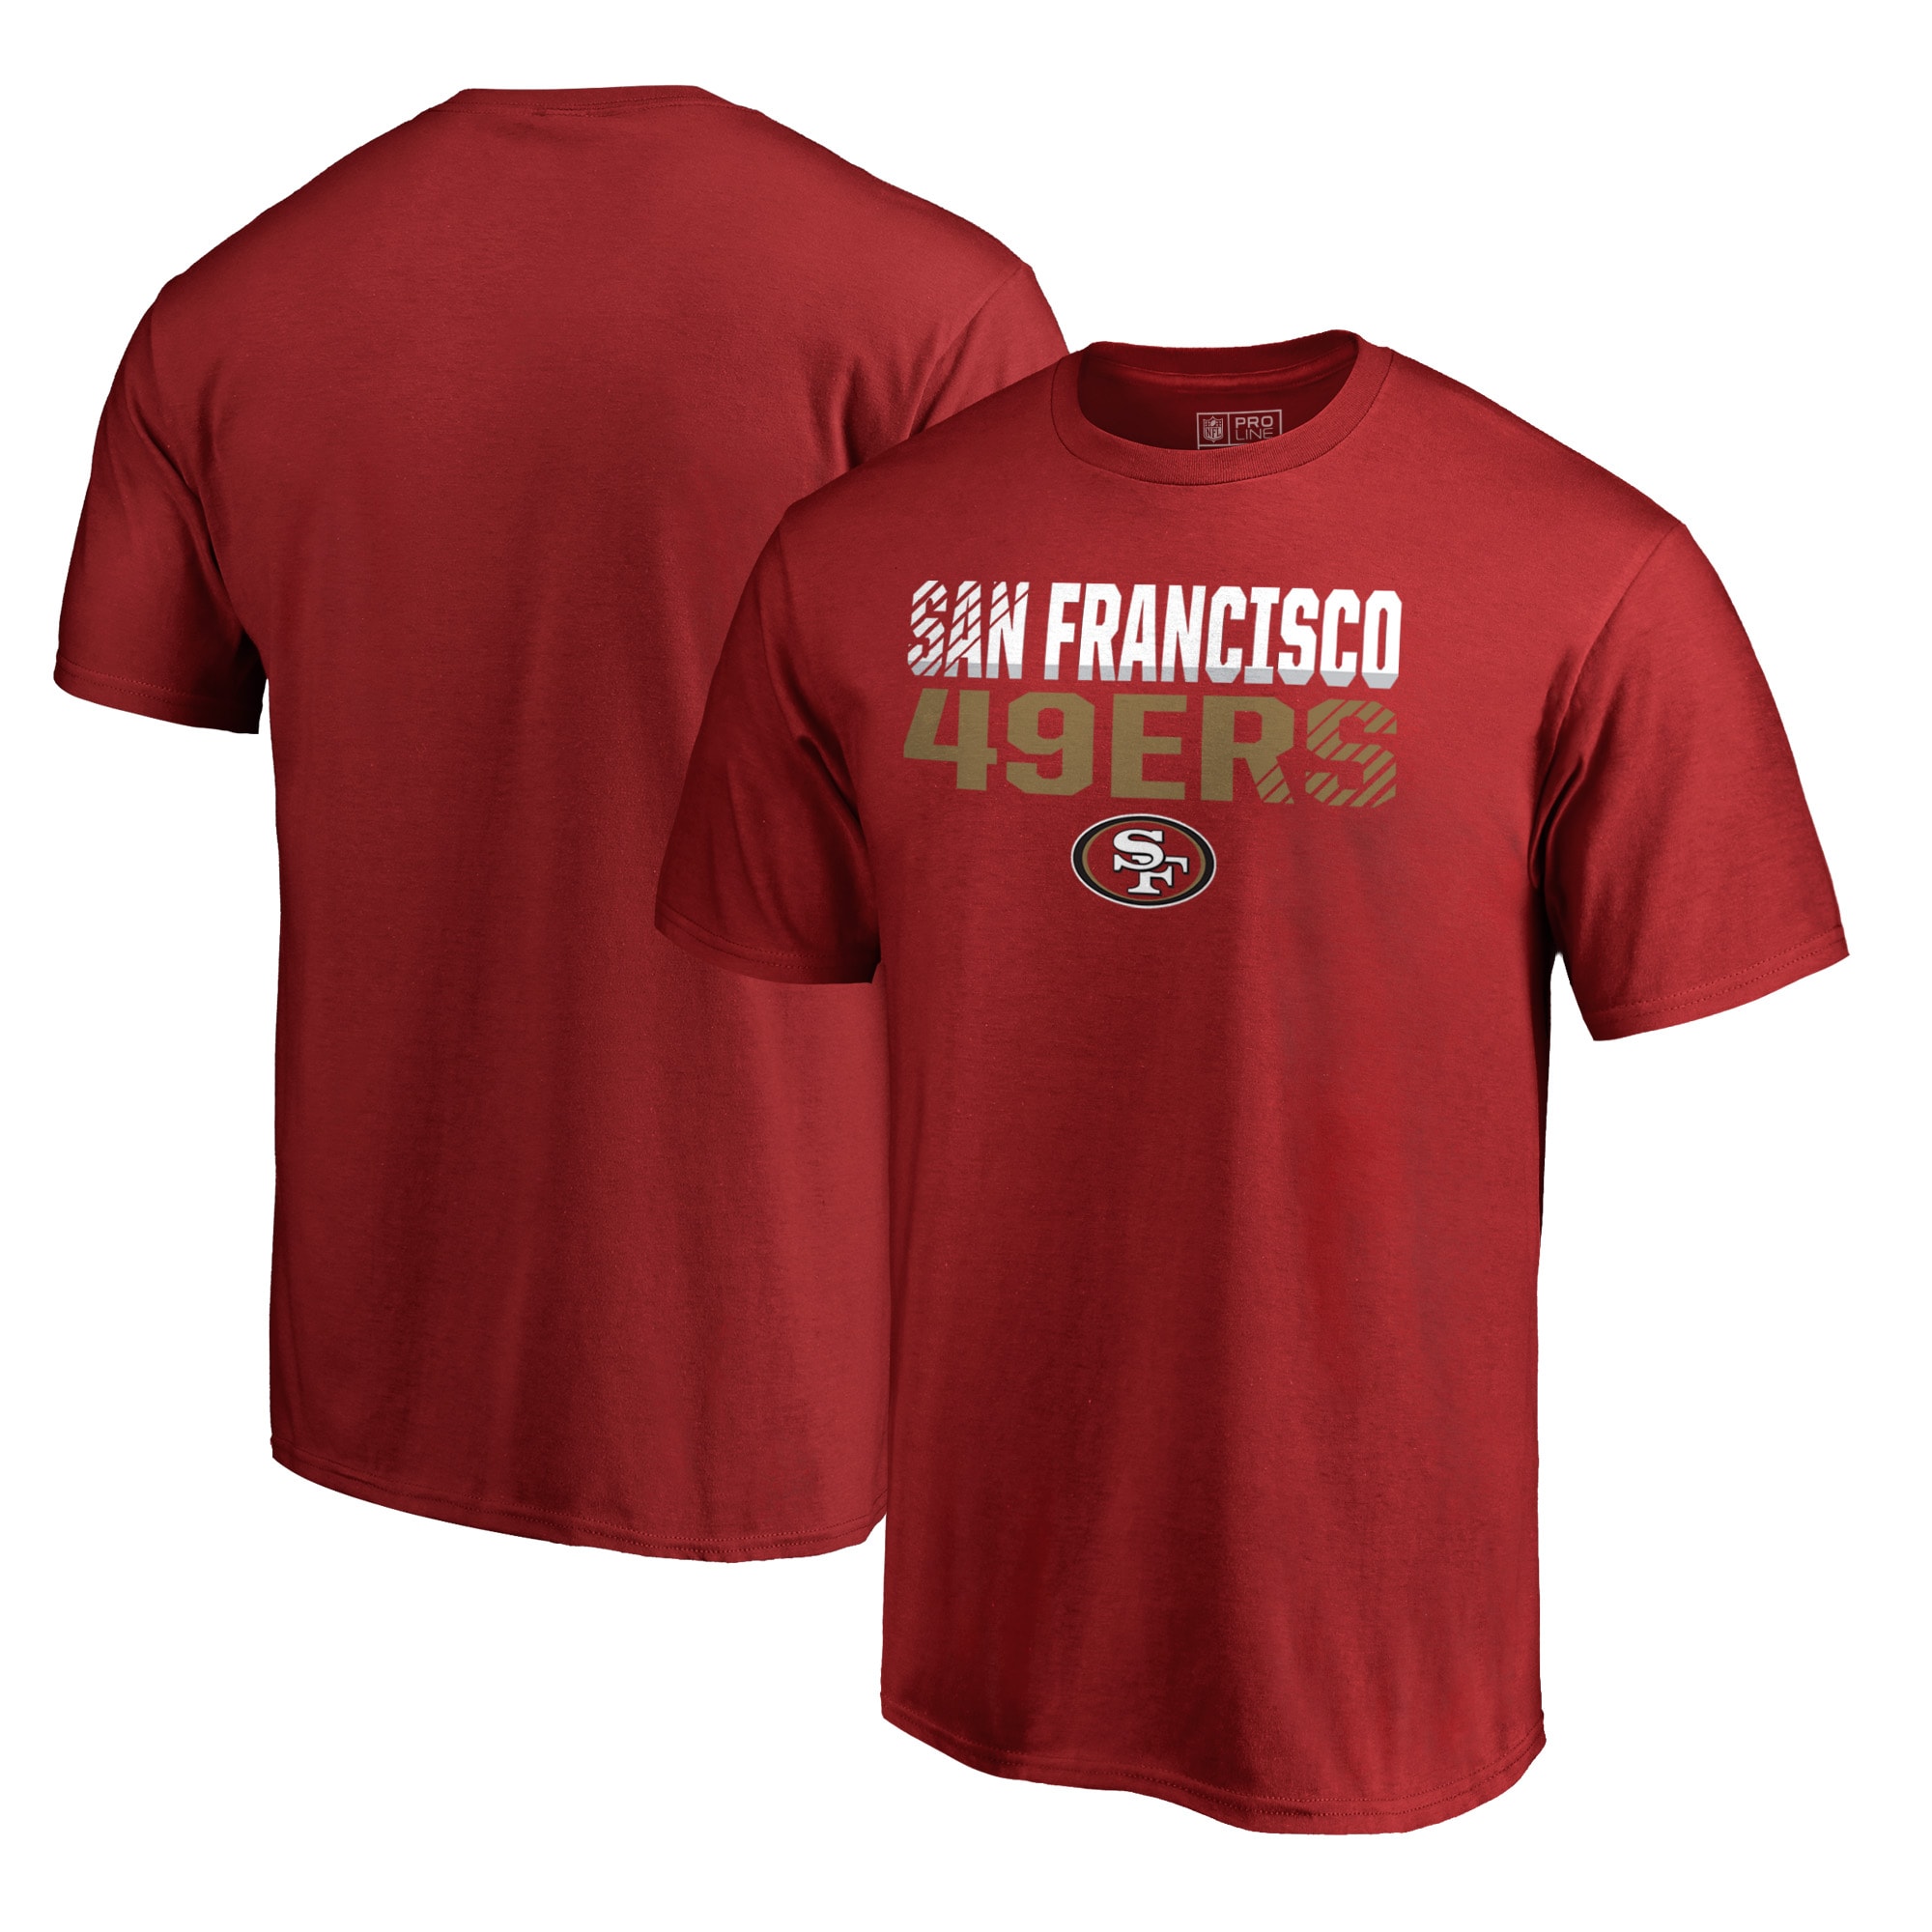 49ers clothing store